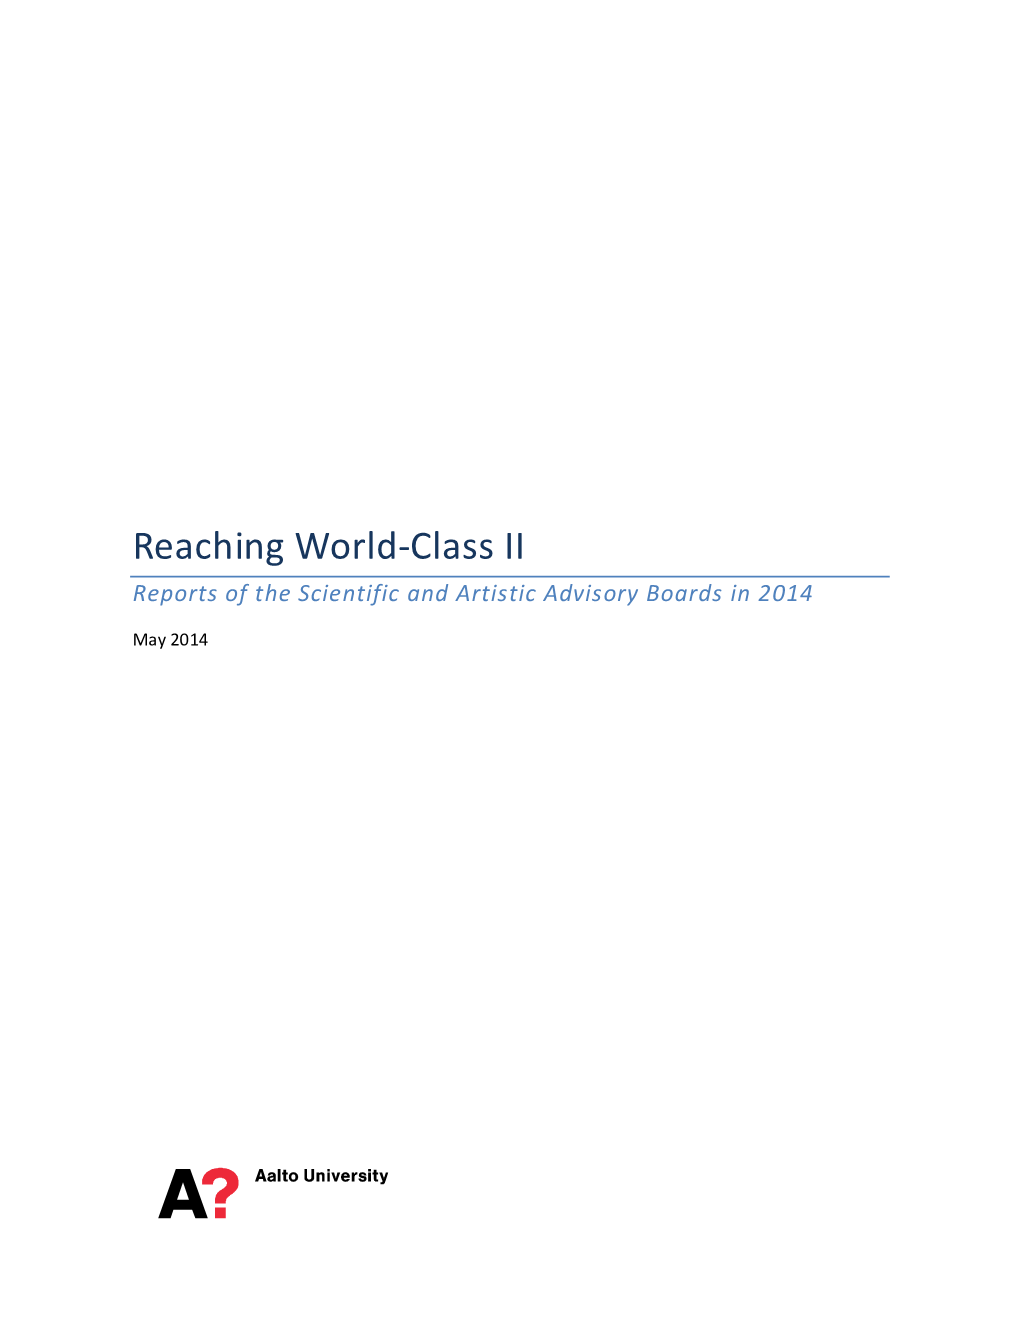 Reaching World-Class II Reports of the Scientific and Artistic Advisory Boards in 2014